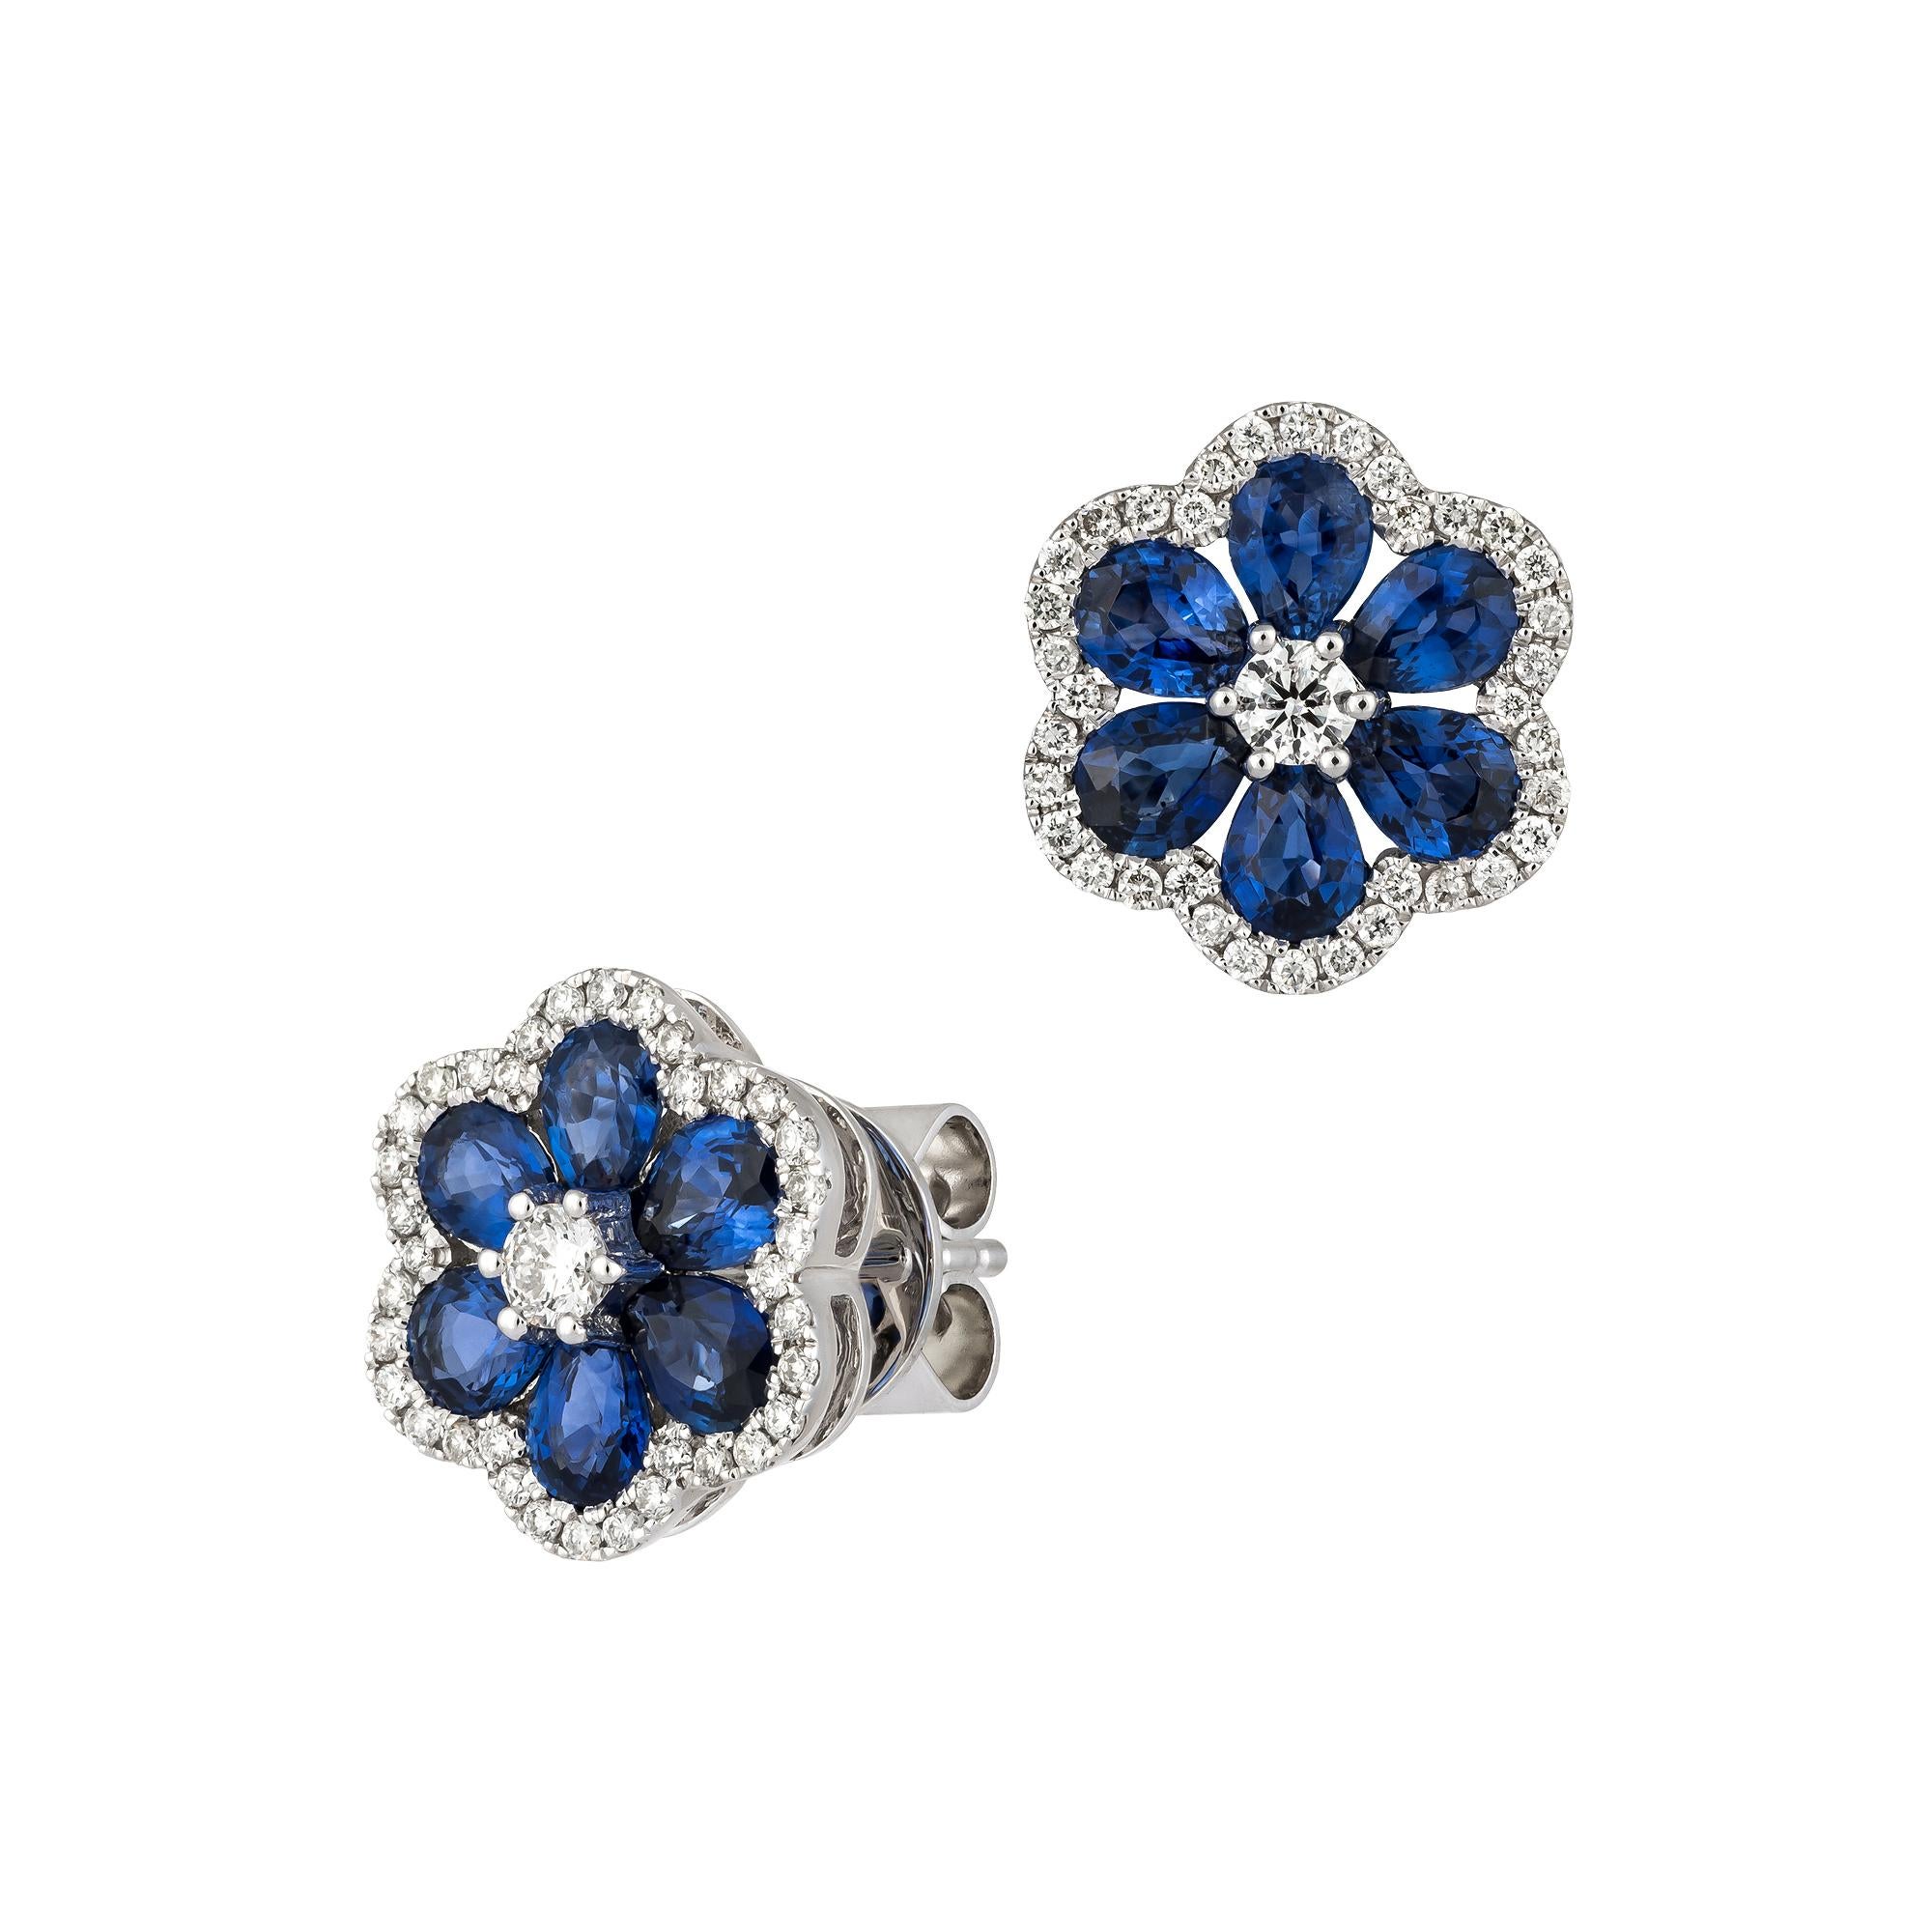 EARRING 18K White Gold Blue Sapphire 2.35 Cts/12 Pieces, D 0.36 Cts/74 Pieces
